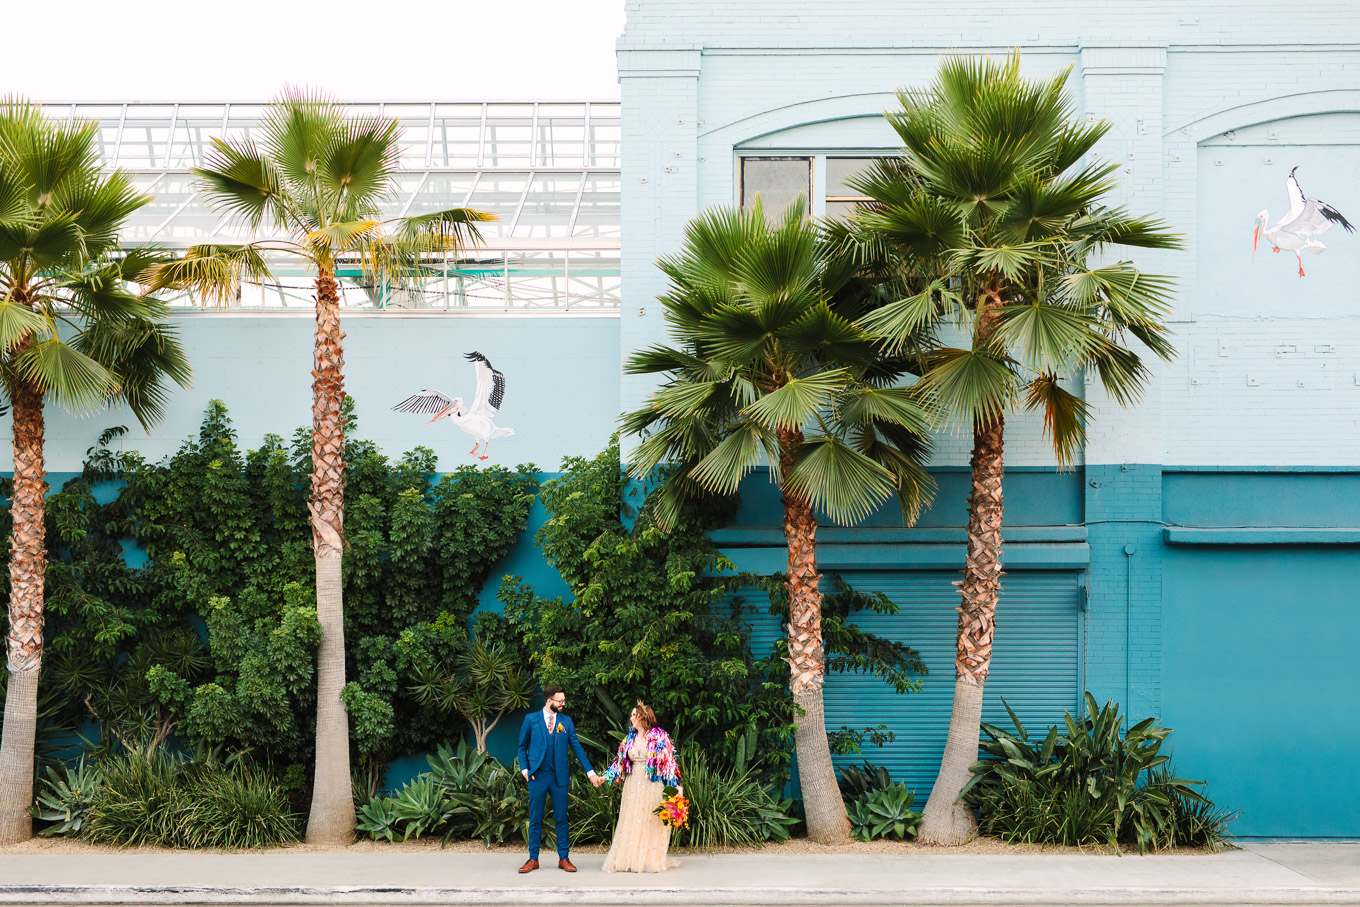 Colorful bride and groom in front of exterior of Valentine in DTLA | Colorful Downtown Los Angeles Valentine Wedding | Los Angeles wedding photographer | #losangeleswedding #colorfulwedding #DTLA #valentinedtla   Source: Mary Costa Photography | Los Angeles